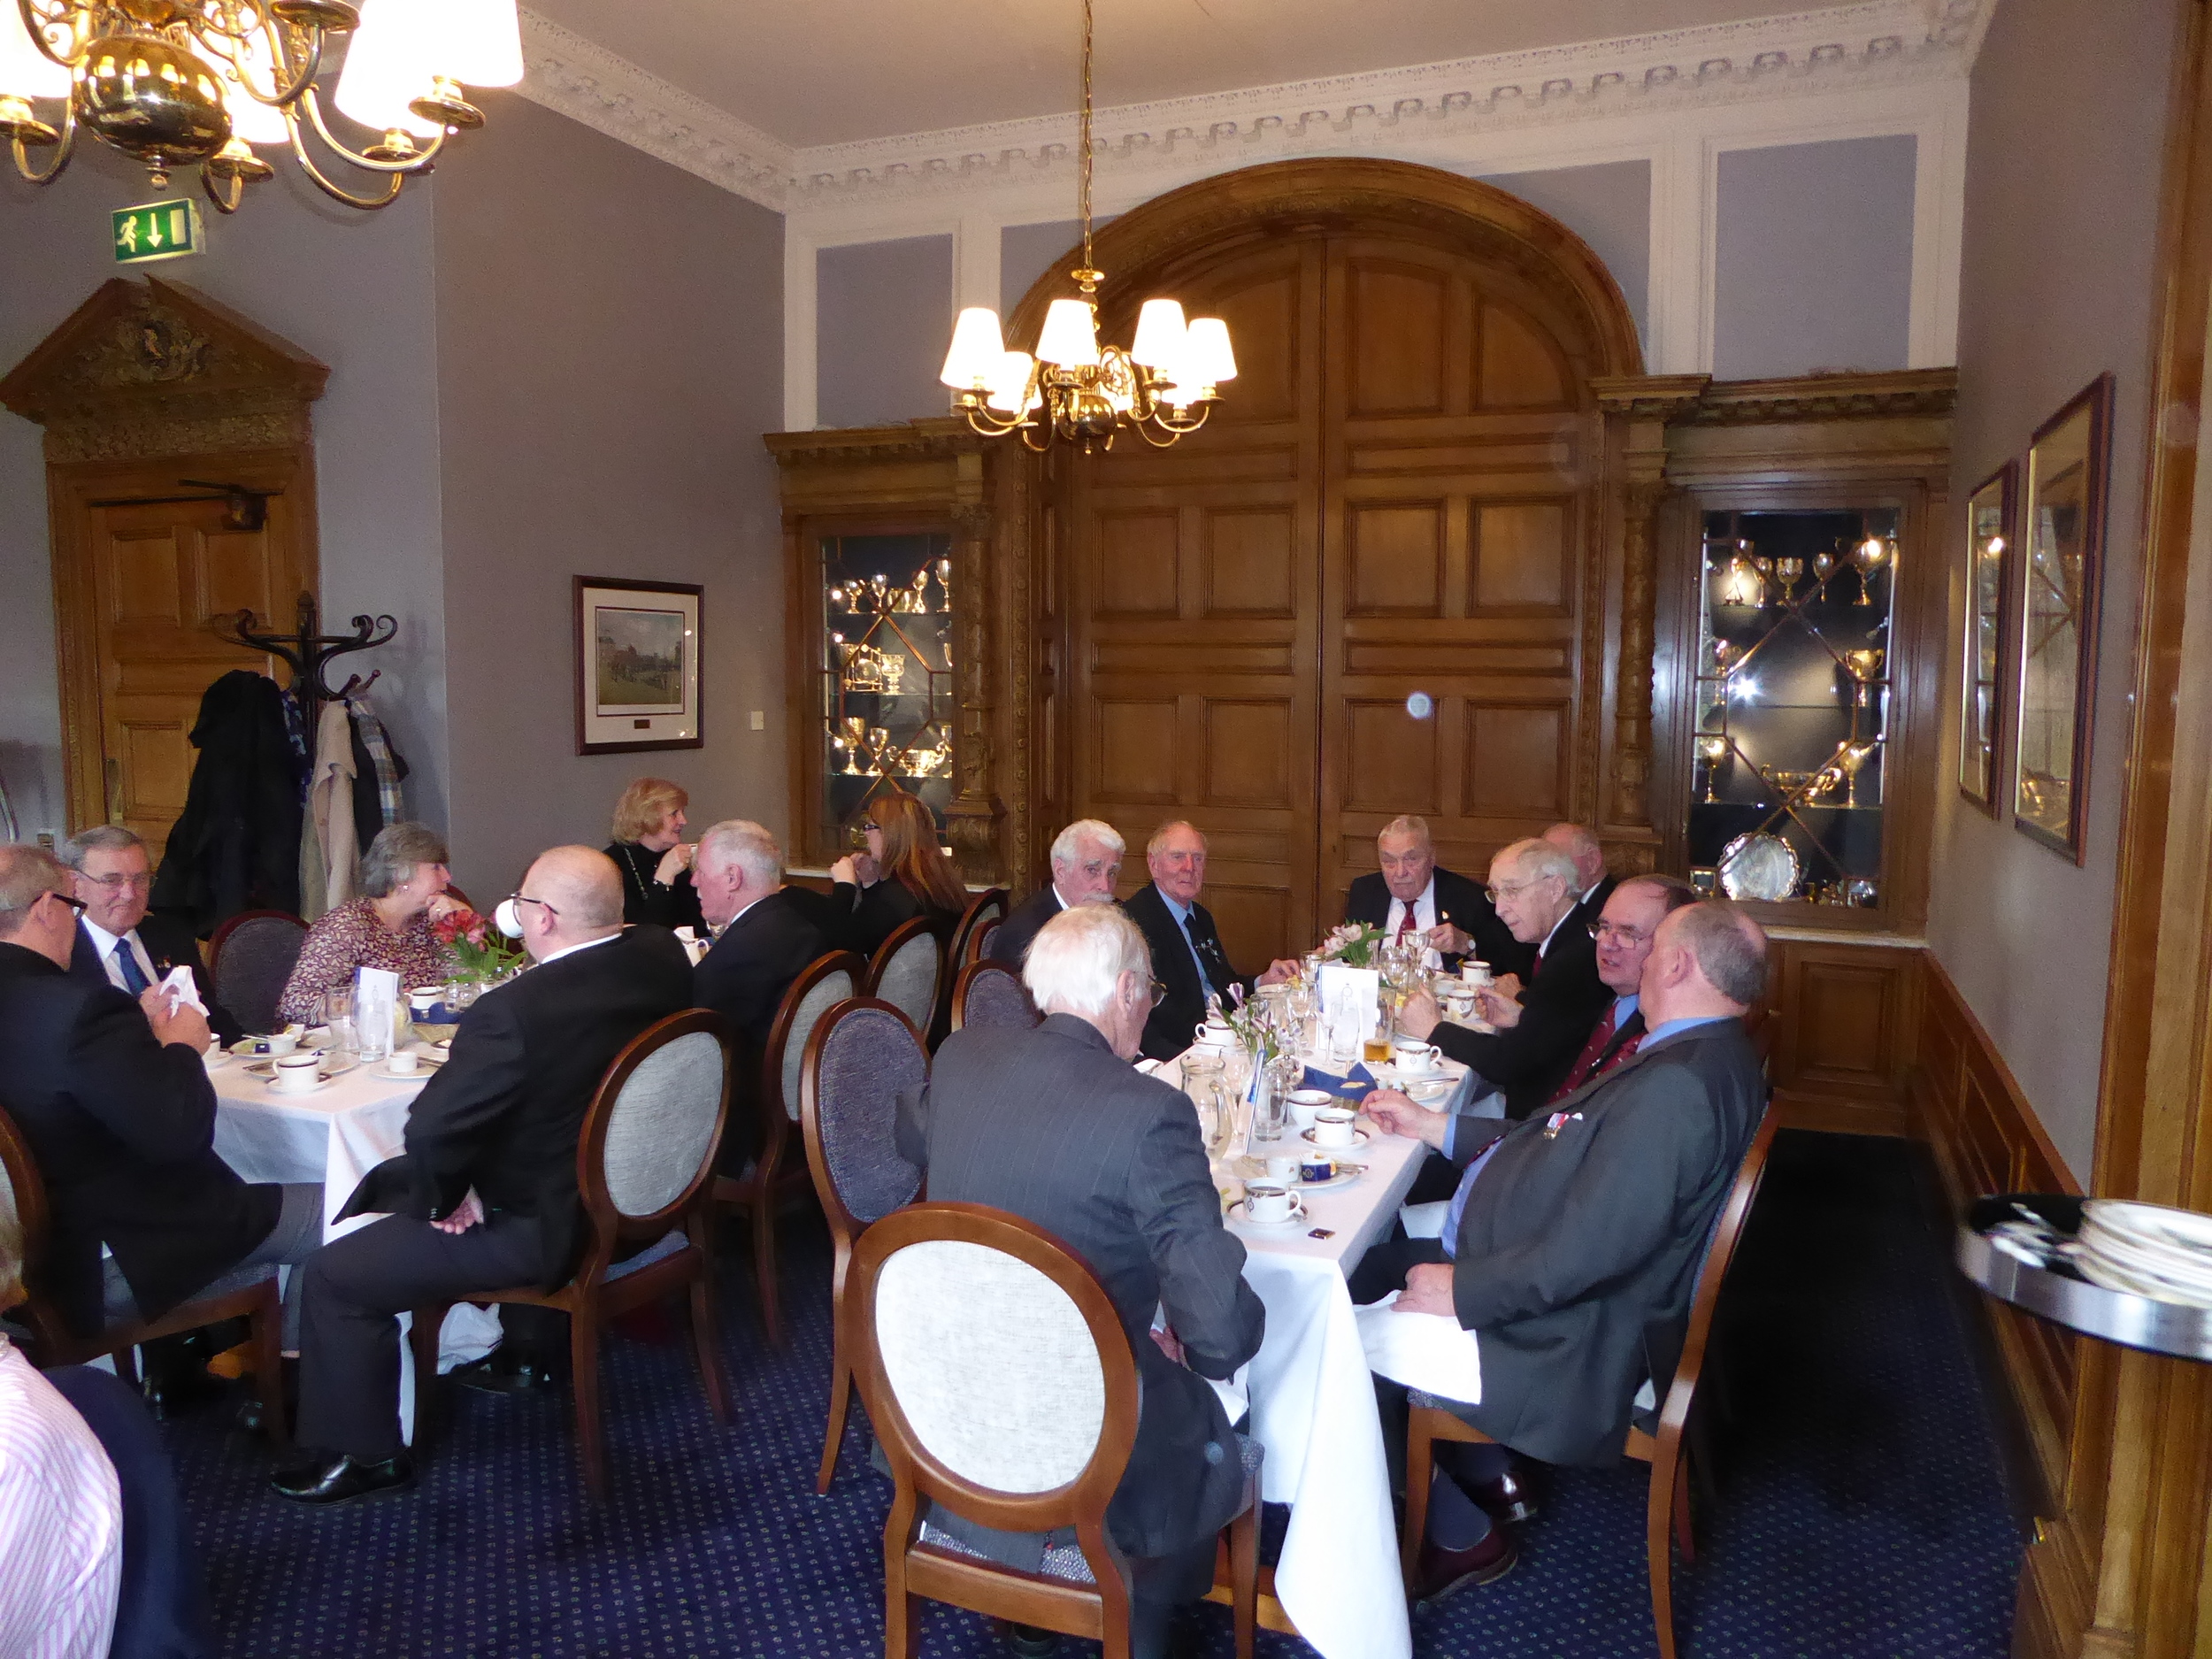 ABA Stirlingshire Visit to the National War Memorial Edinburgh Castle followed by lunch at the Royal Scots Club